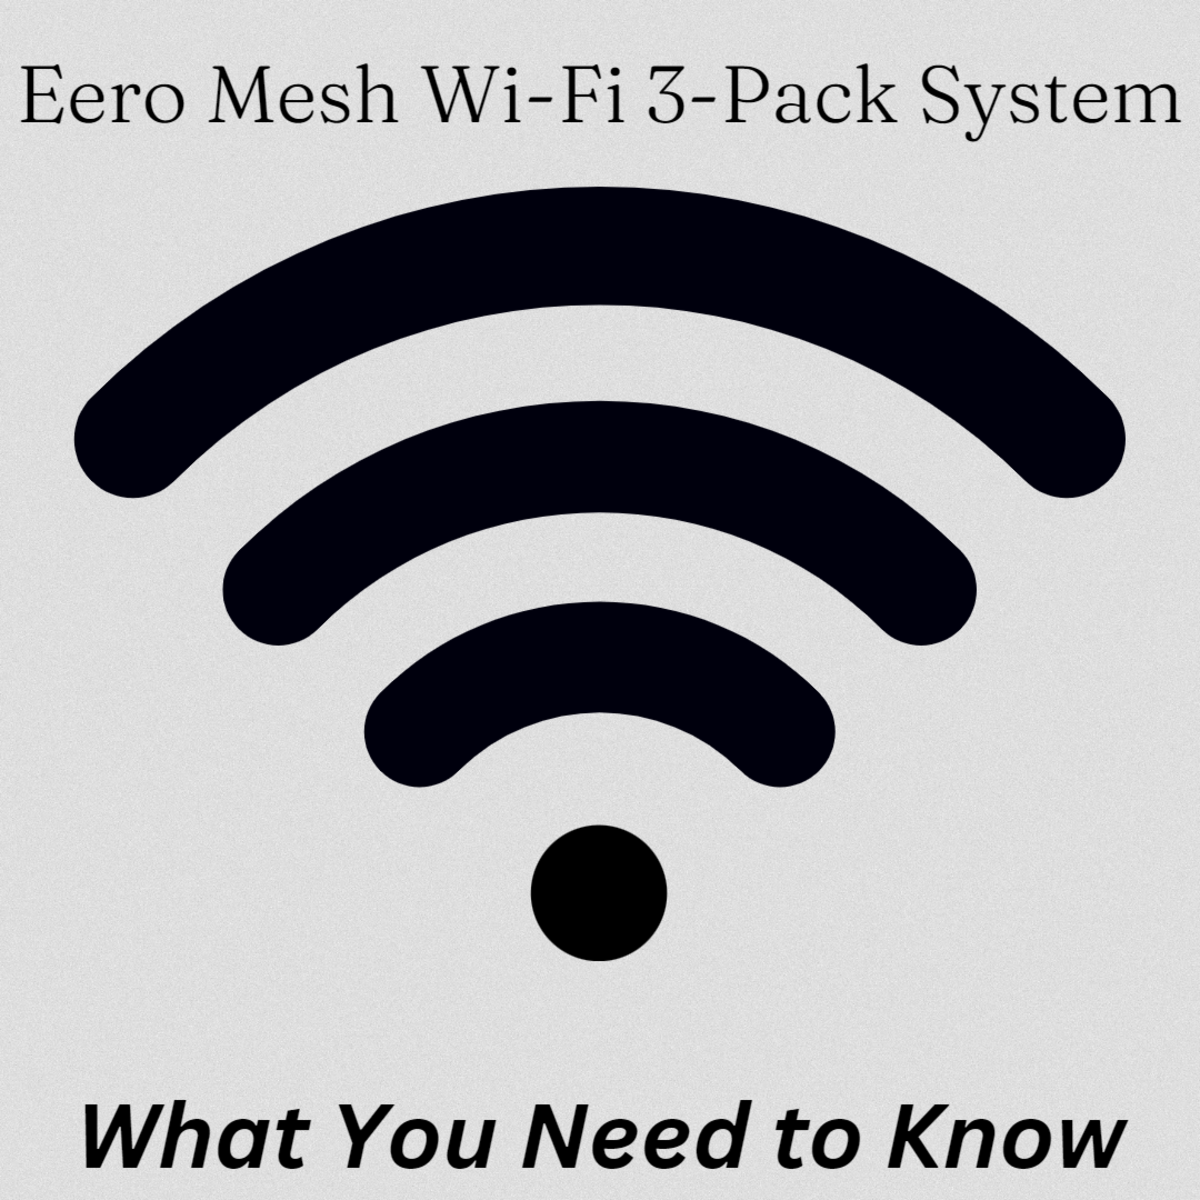 The Eero Mesh Wi-Fi 3-Pack System: What You Need to Know